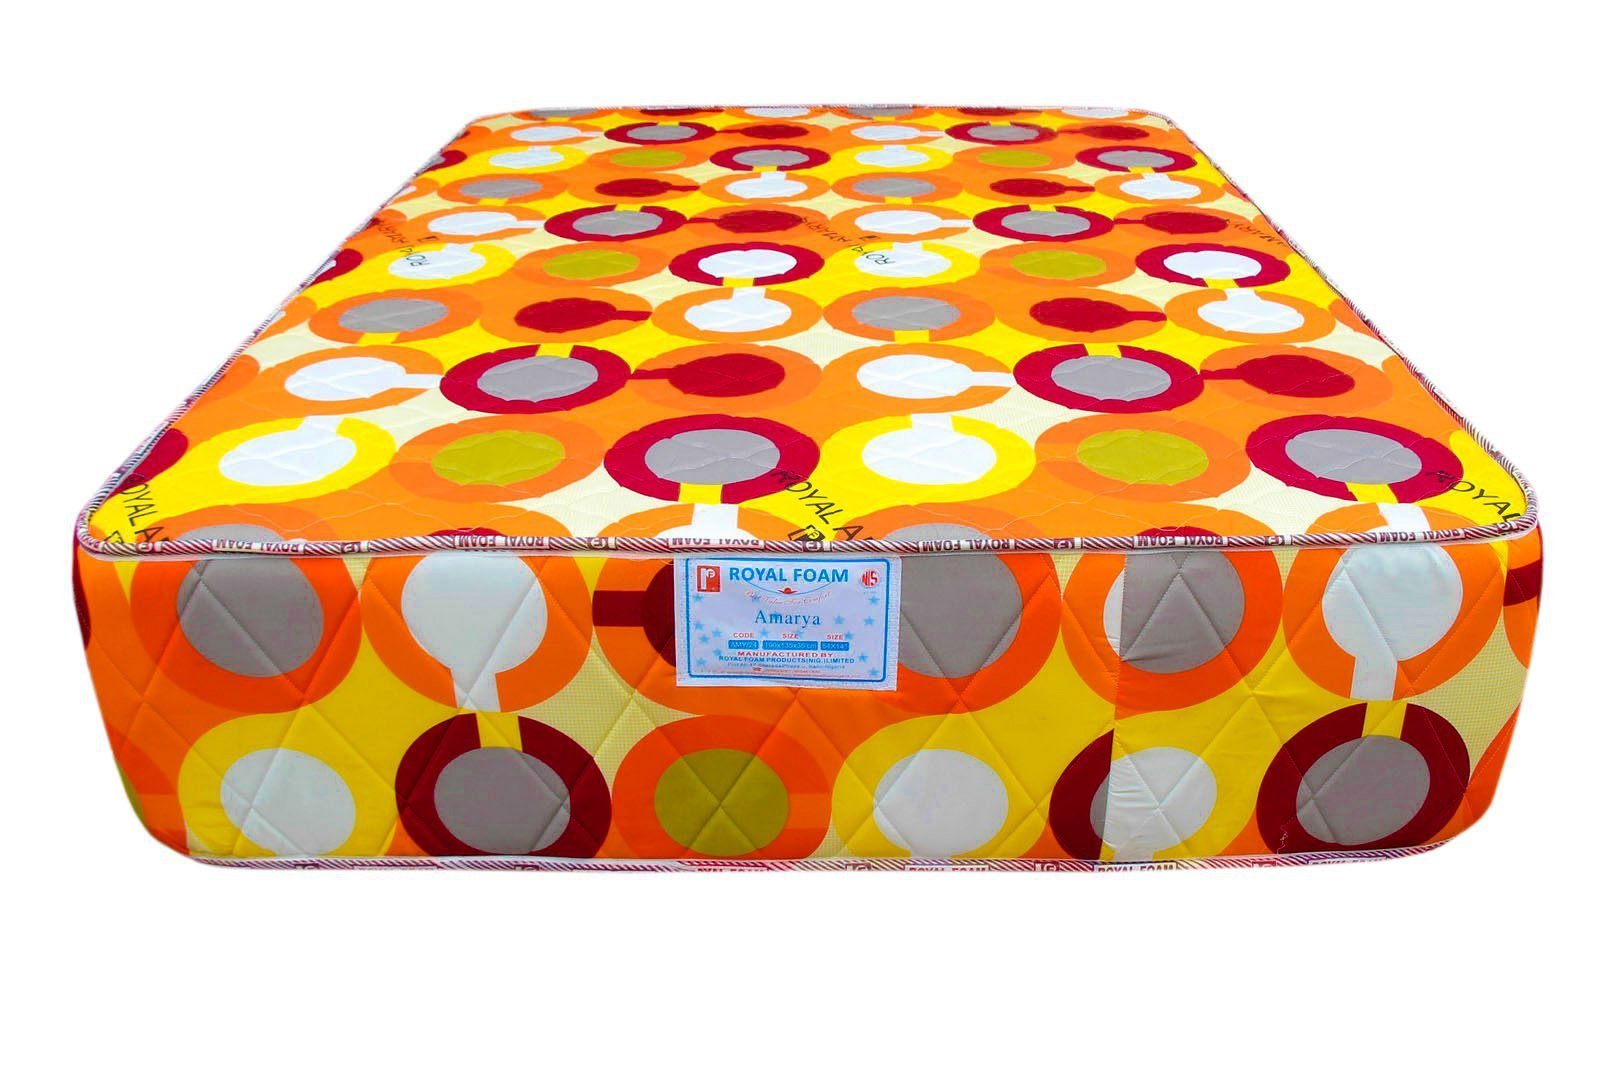 Royal Amarya-Poly Cotton Fabric - 14 Density foam - Fully Quilted Mattress -190X105X20CM [75 x 42 x 8"] [6ft x 3.4ft x 8inches]